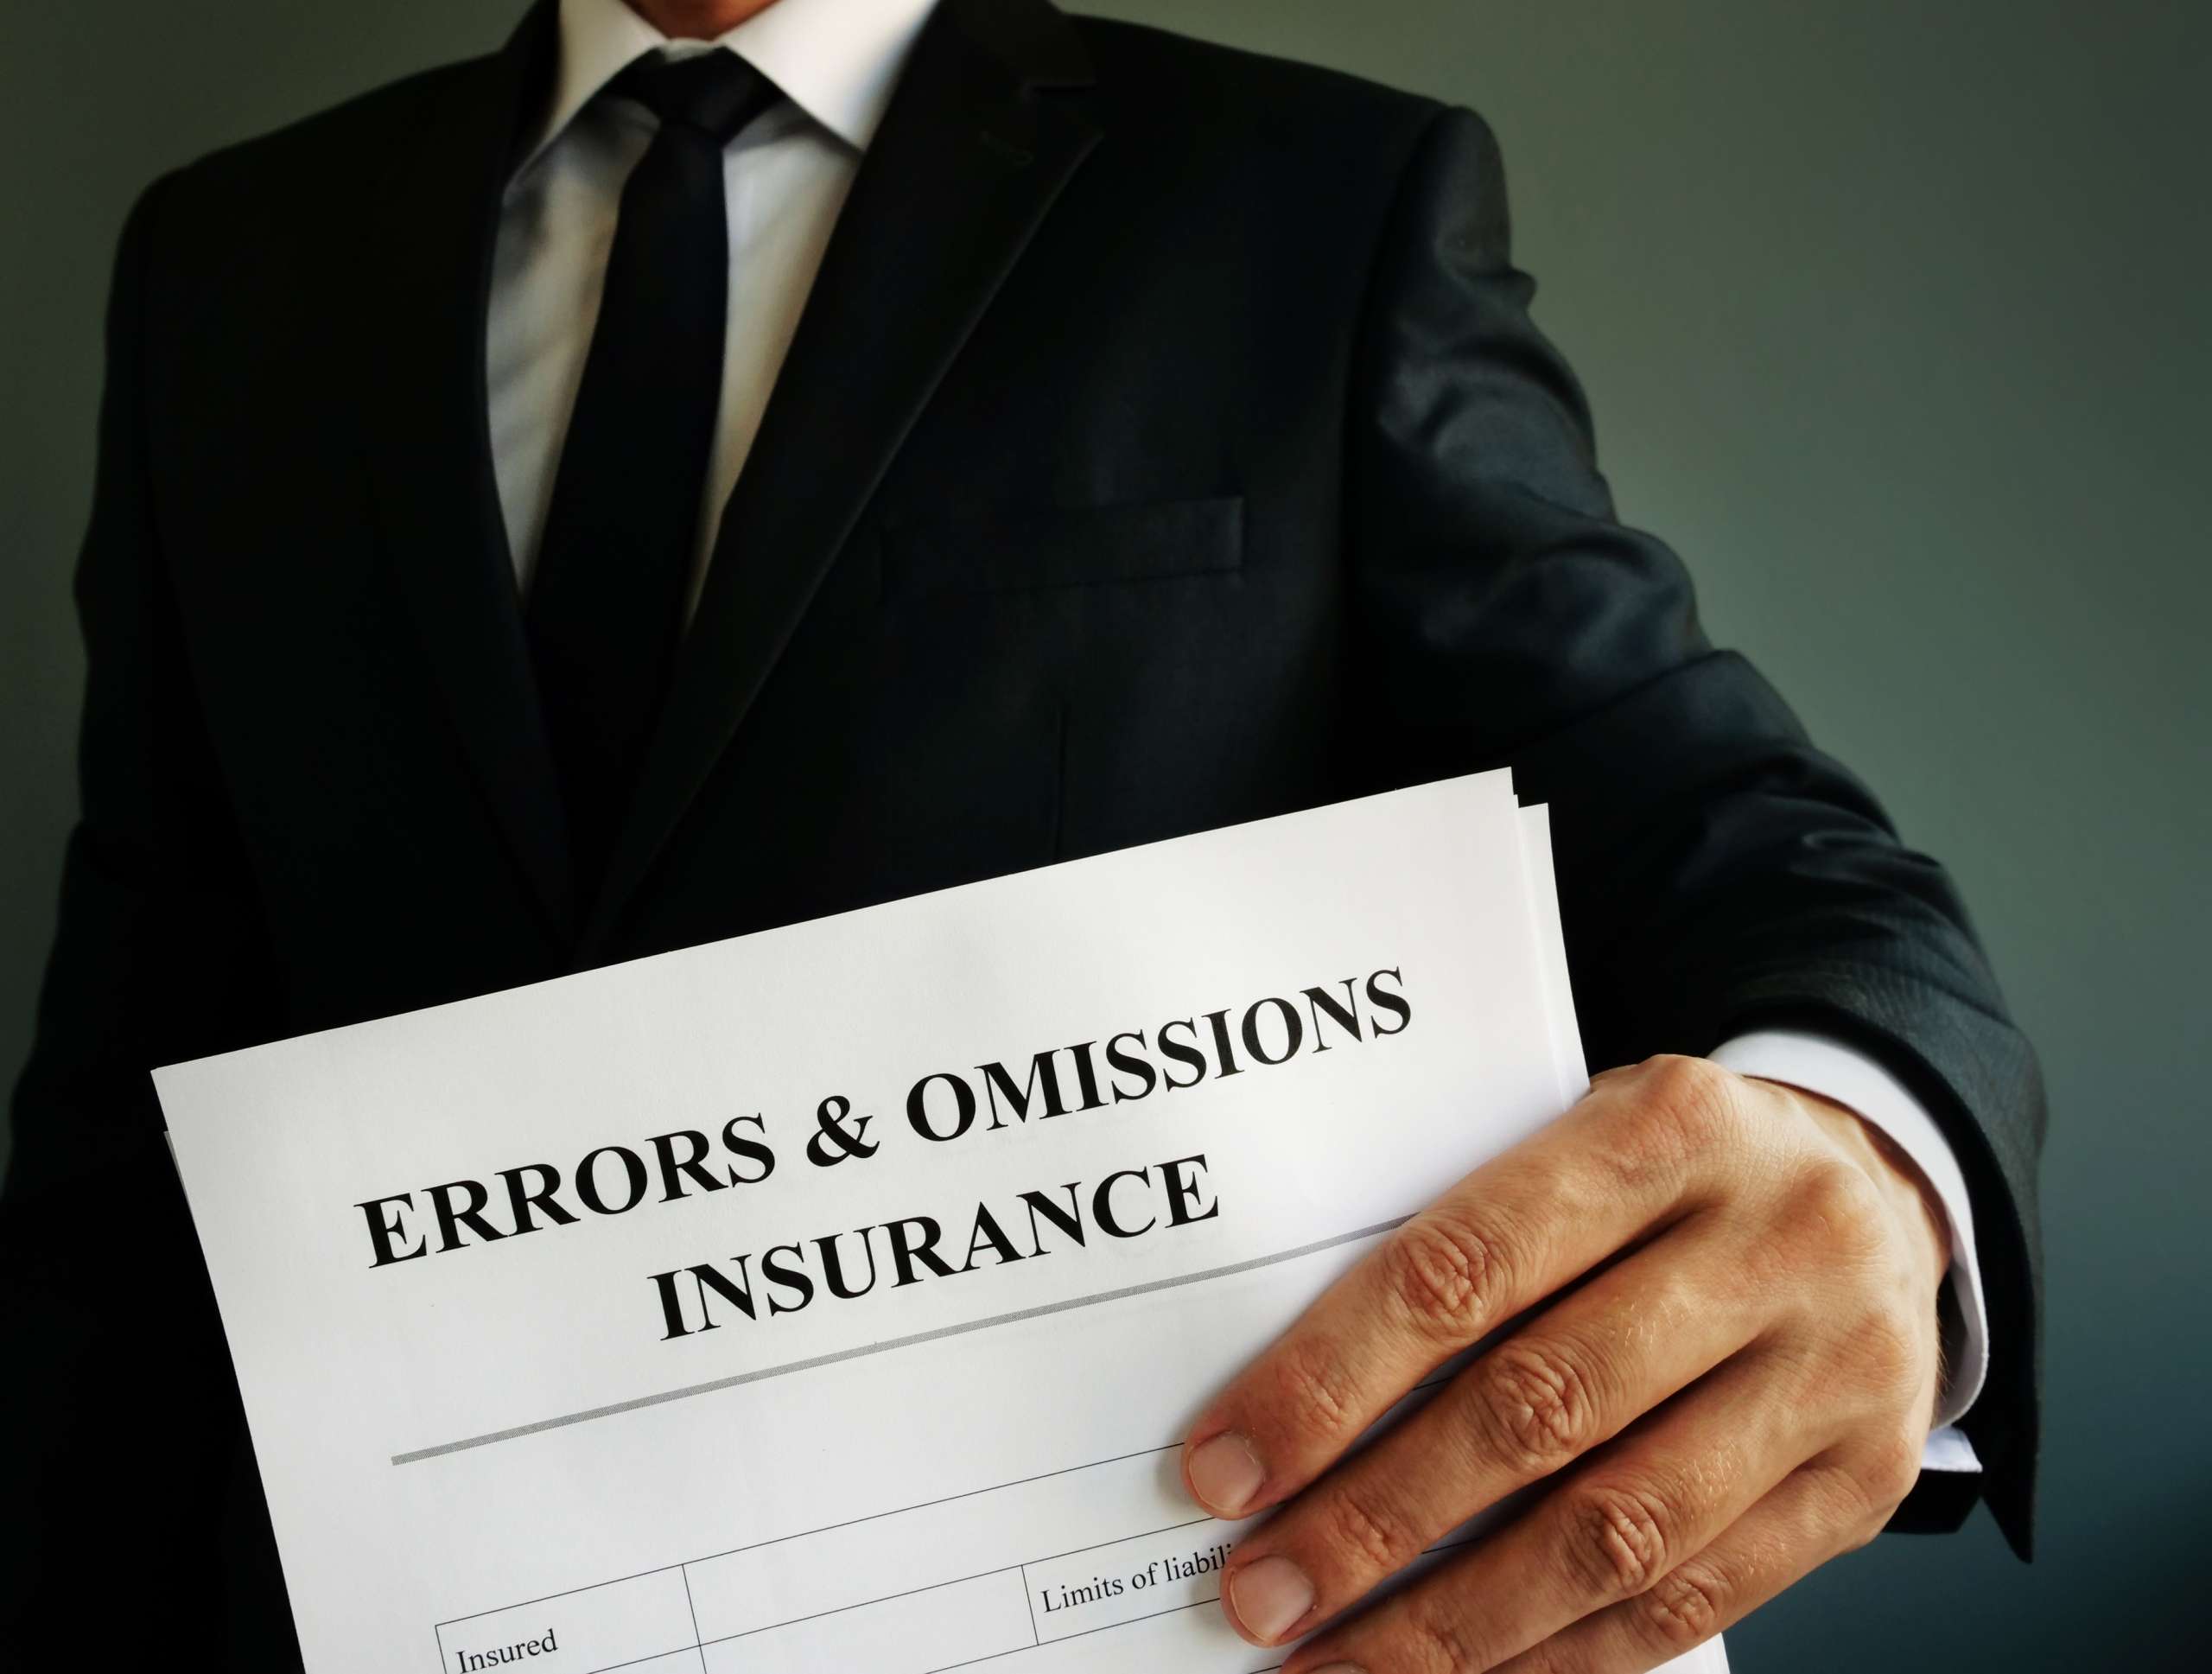 Errors and Omissions (E&O) Insurance Policy